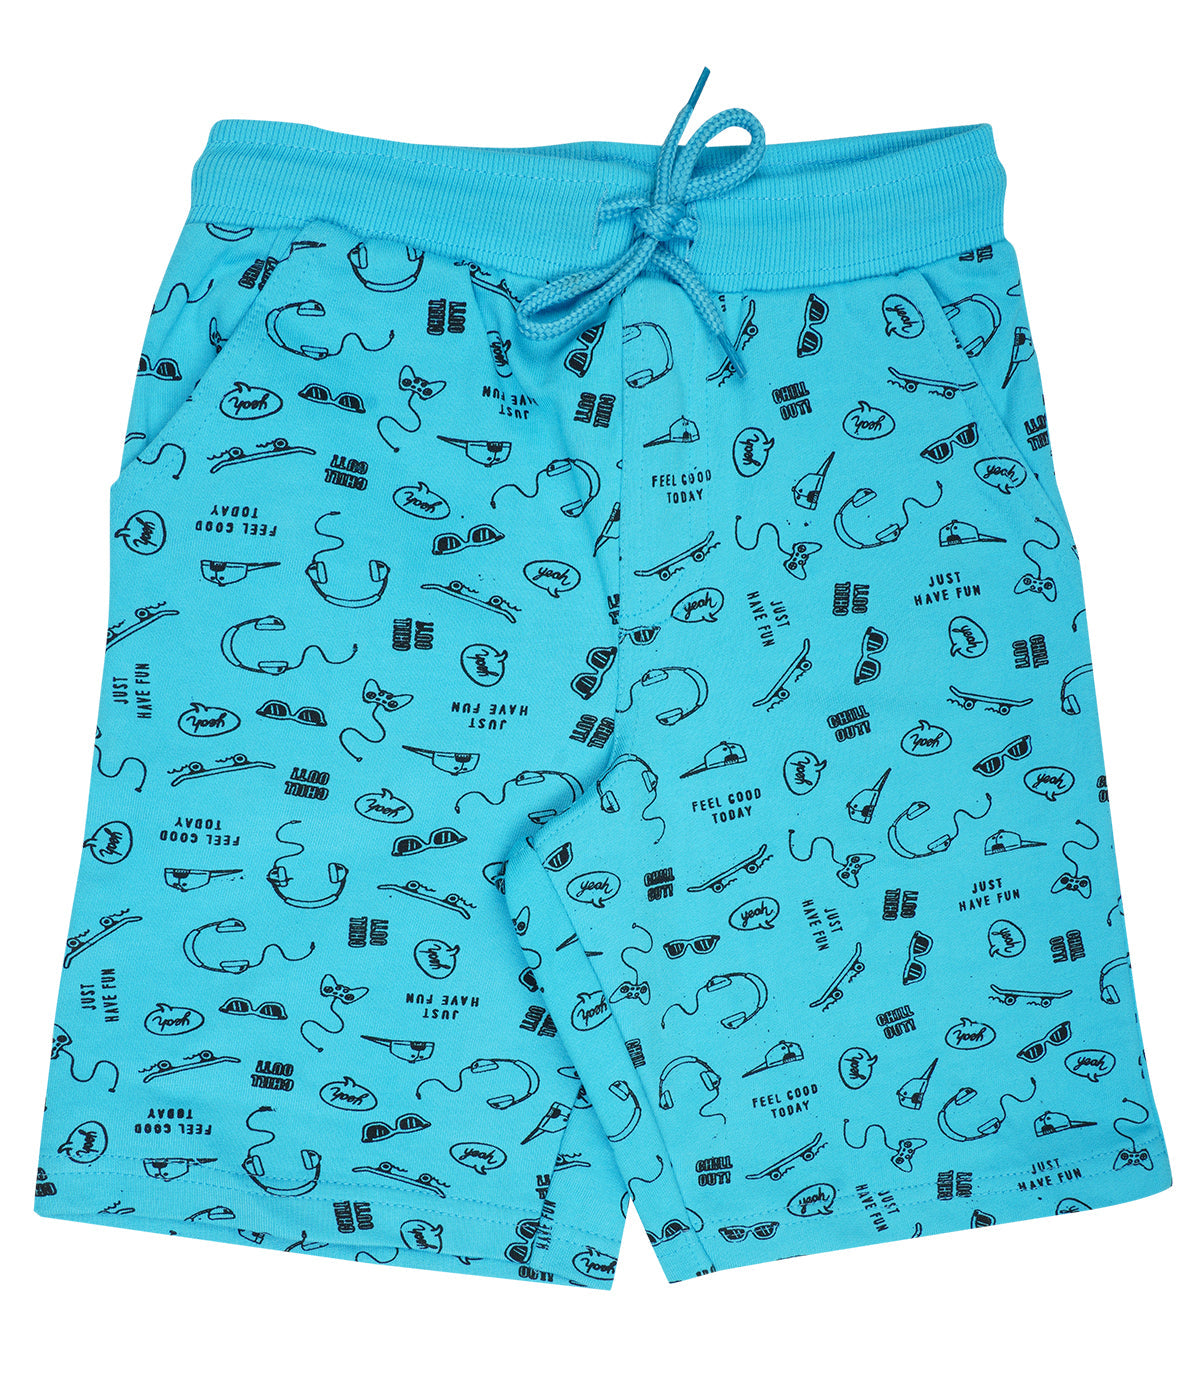 Yalzz Short For Boys Casual Printed Pure Cotton Blue Pack of 1